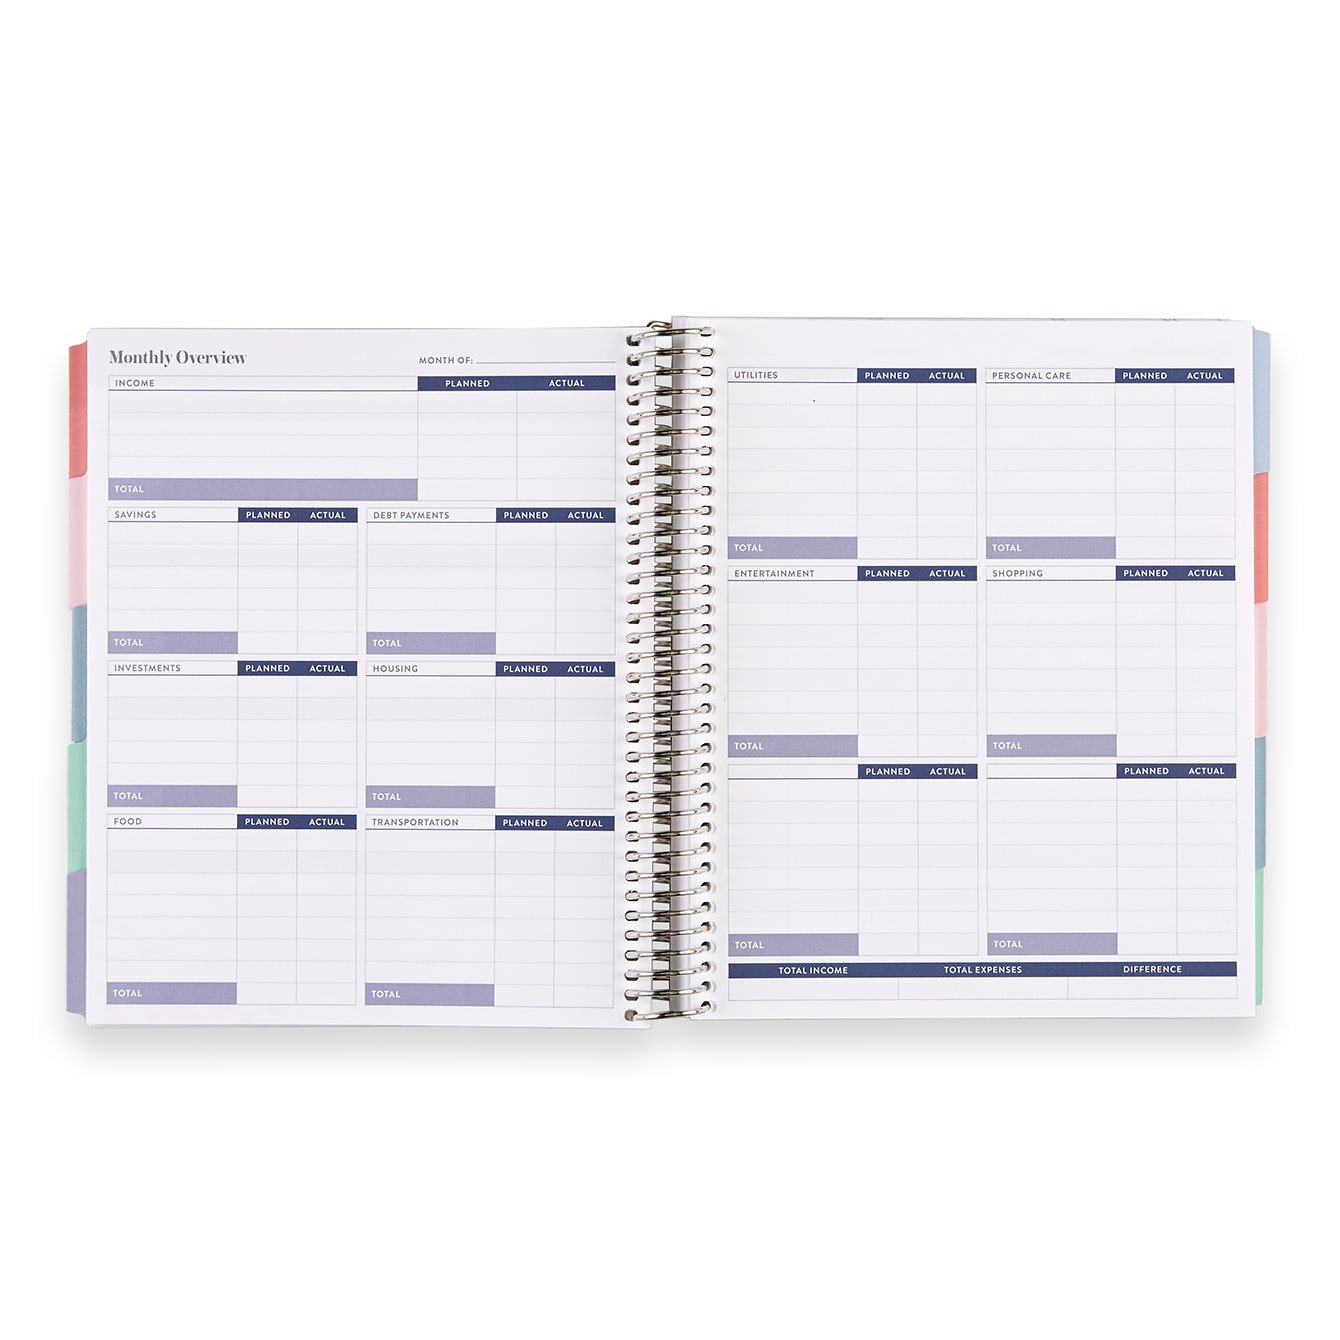 Budget Tracking and Finance Travelers Notebook Insert